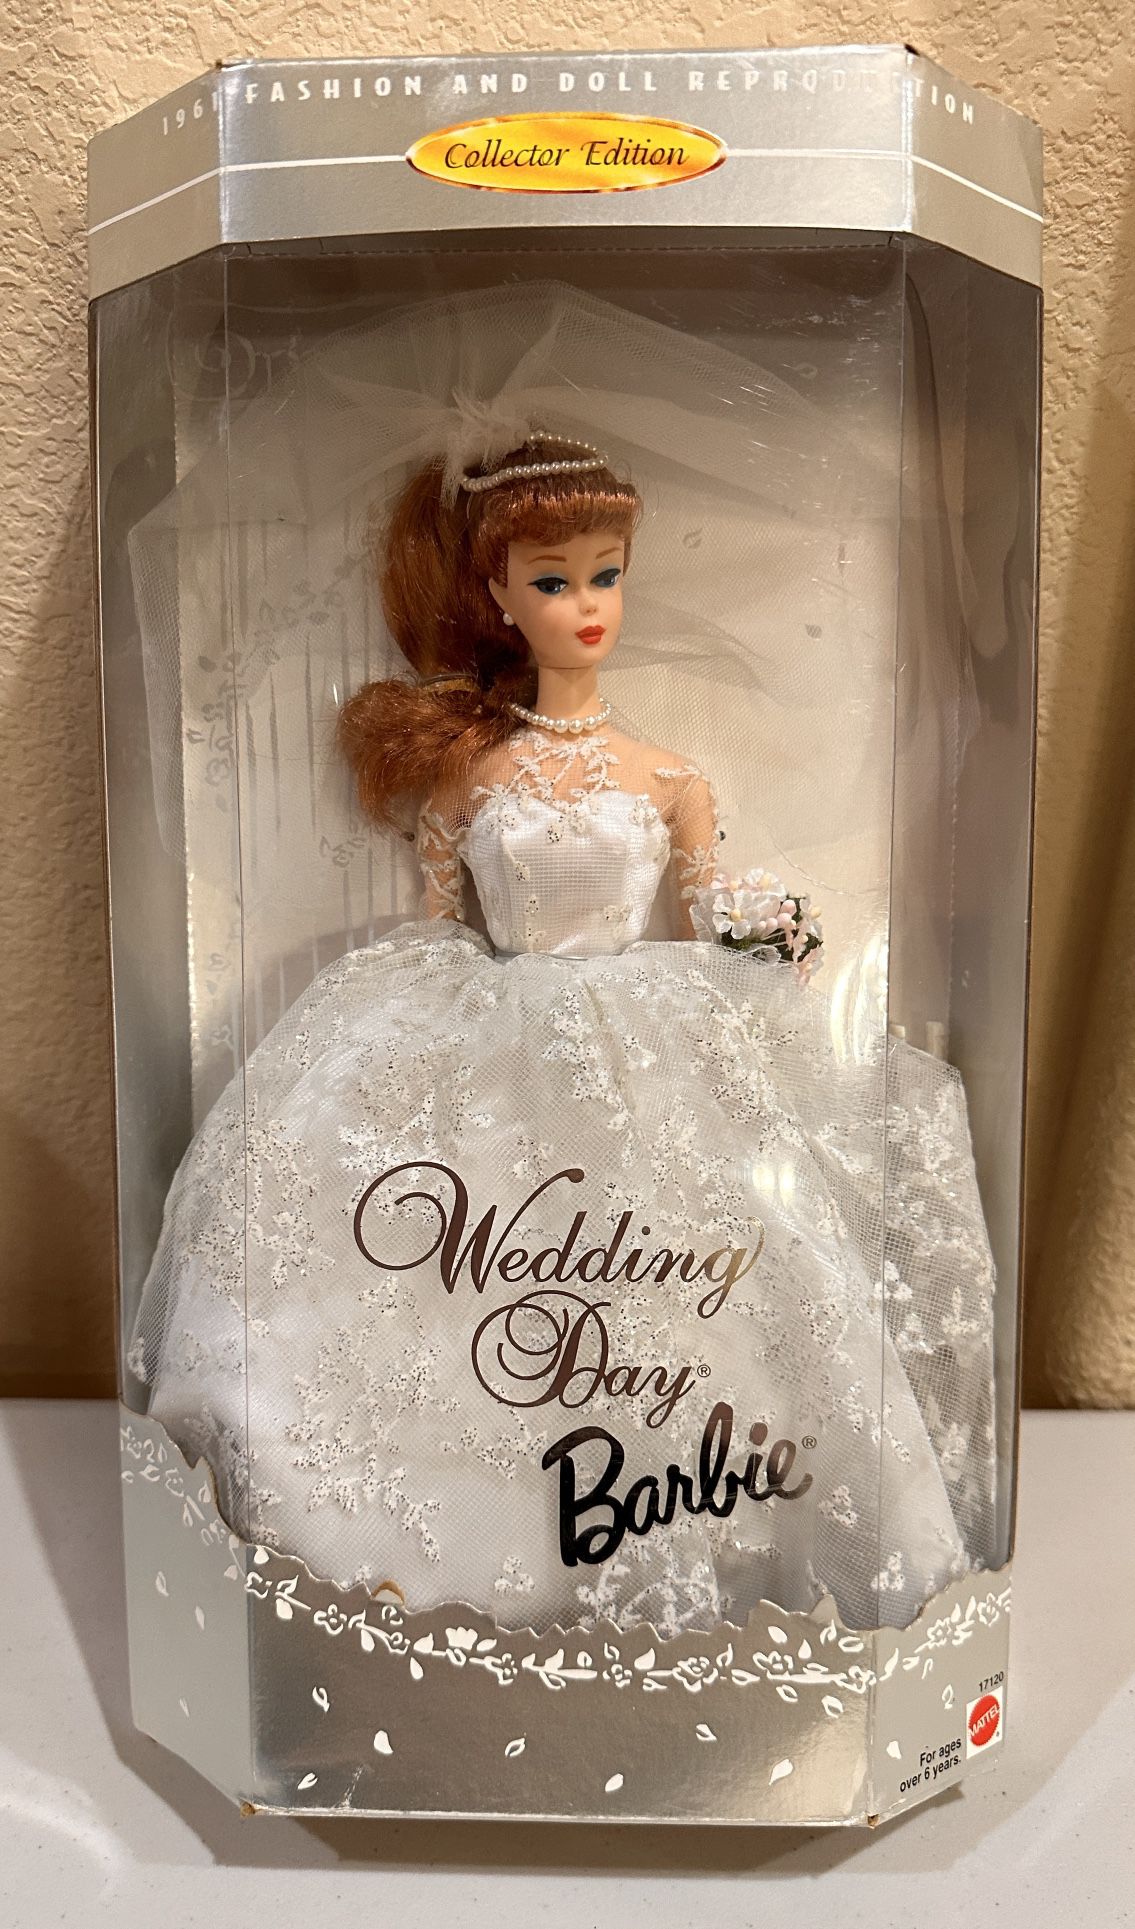 1996 Wedding Day Barbie  - Collector Edition  